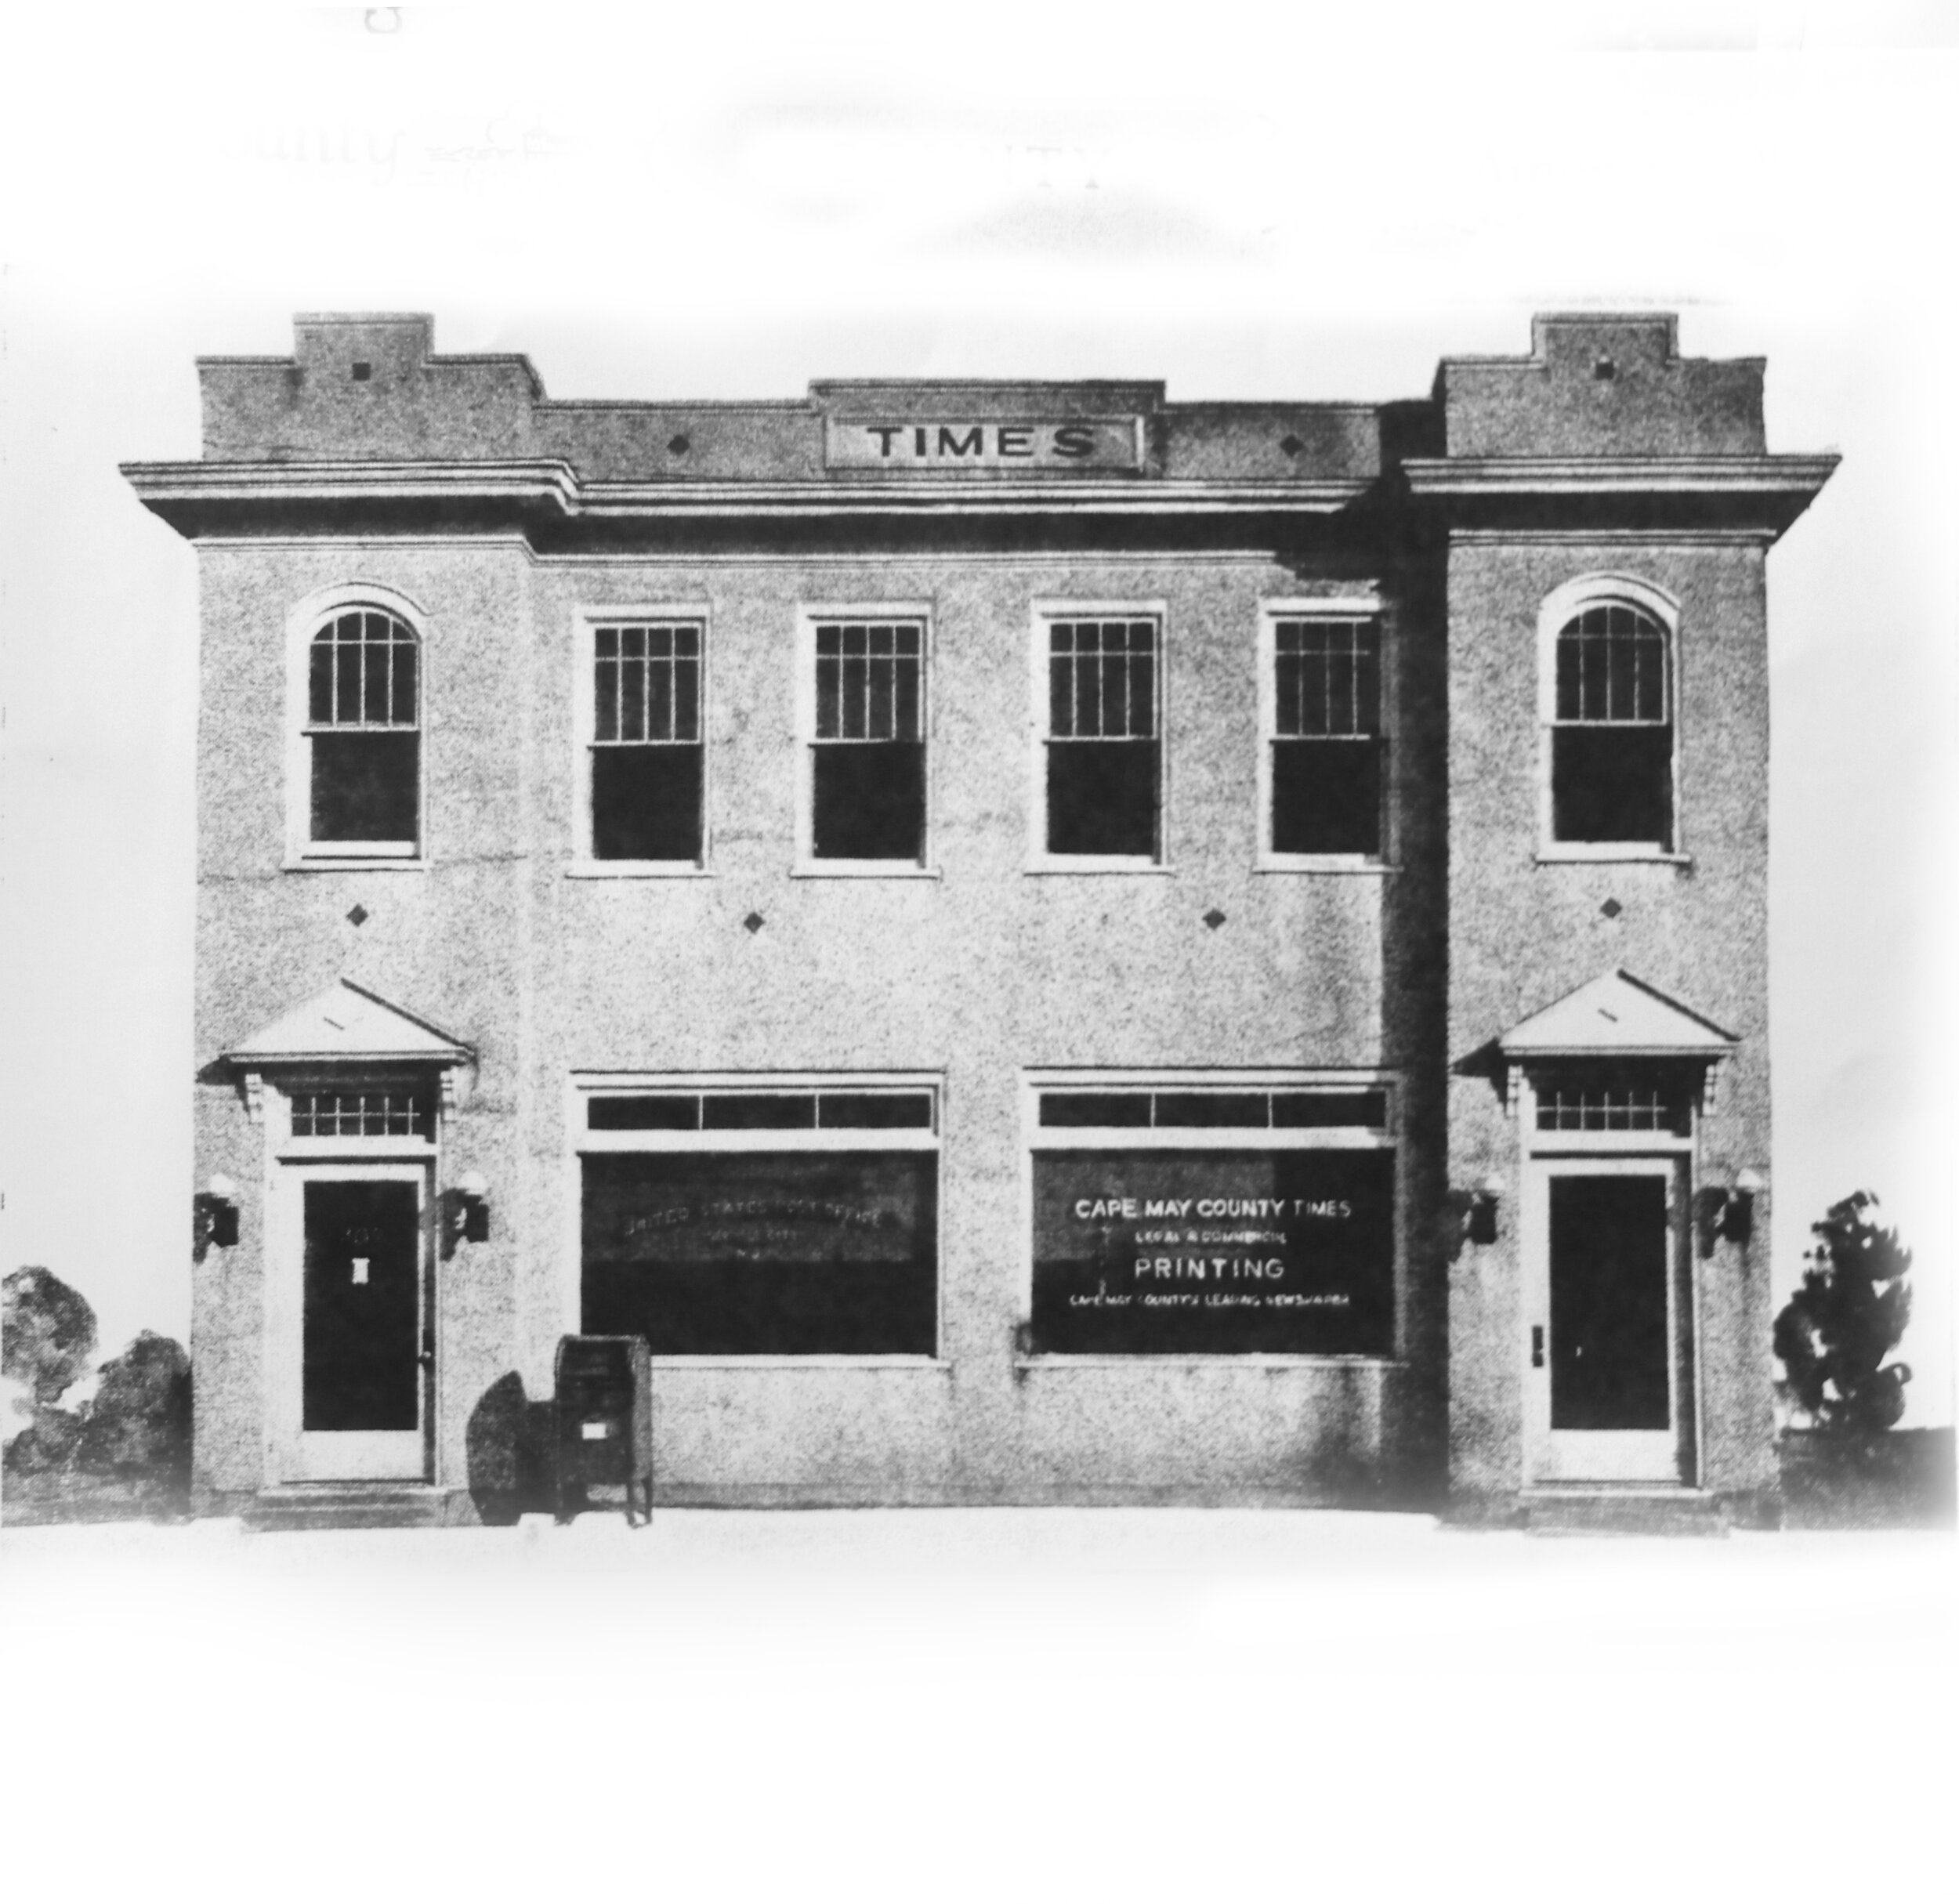 The building at 4411 Landis Avenue where Haffert  established the Atlantic Printing and Publishing Company.